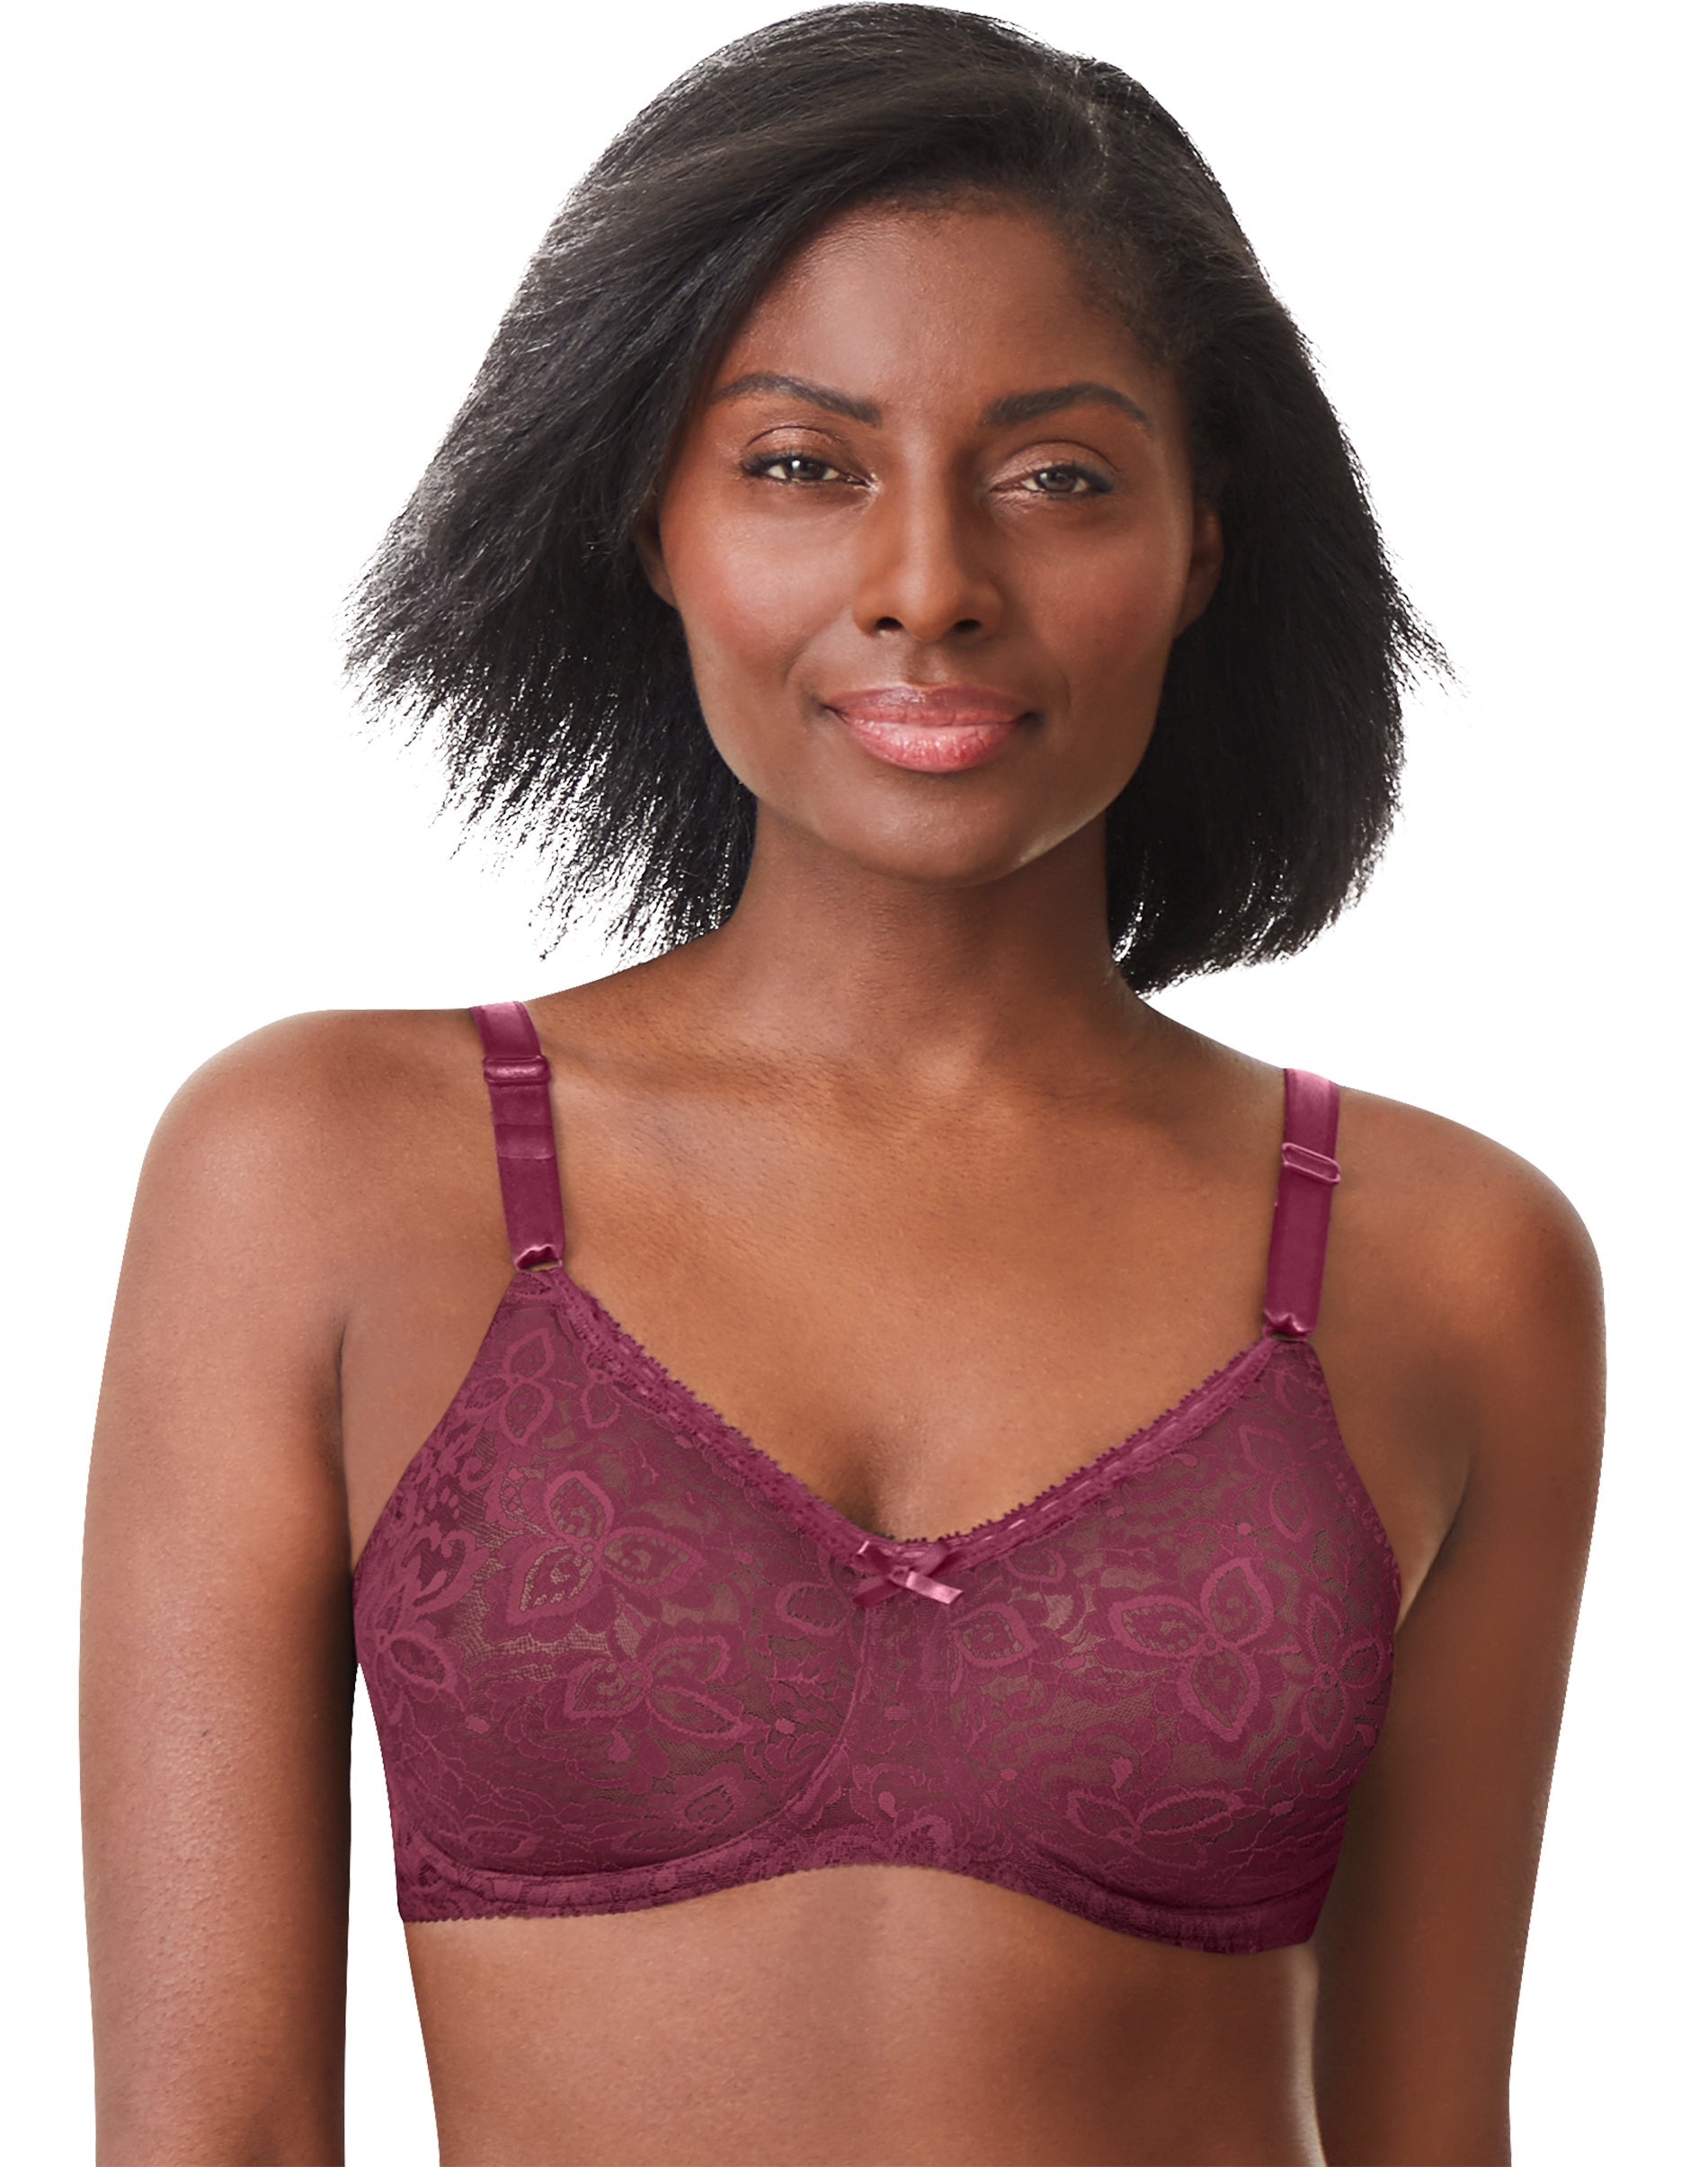 NWT Bali Pink Stretch Lace Underwire Bra Style 3432 Sz 34C - $28 New With  Tags - From Alison